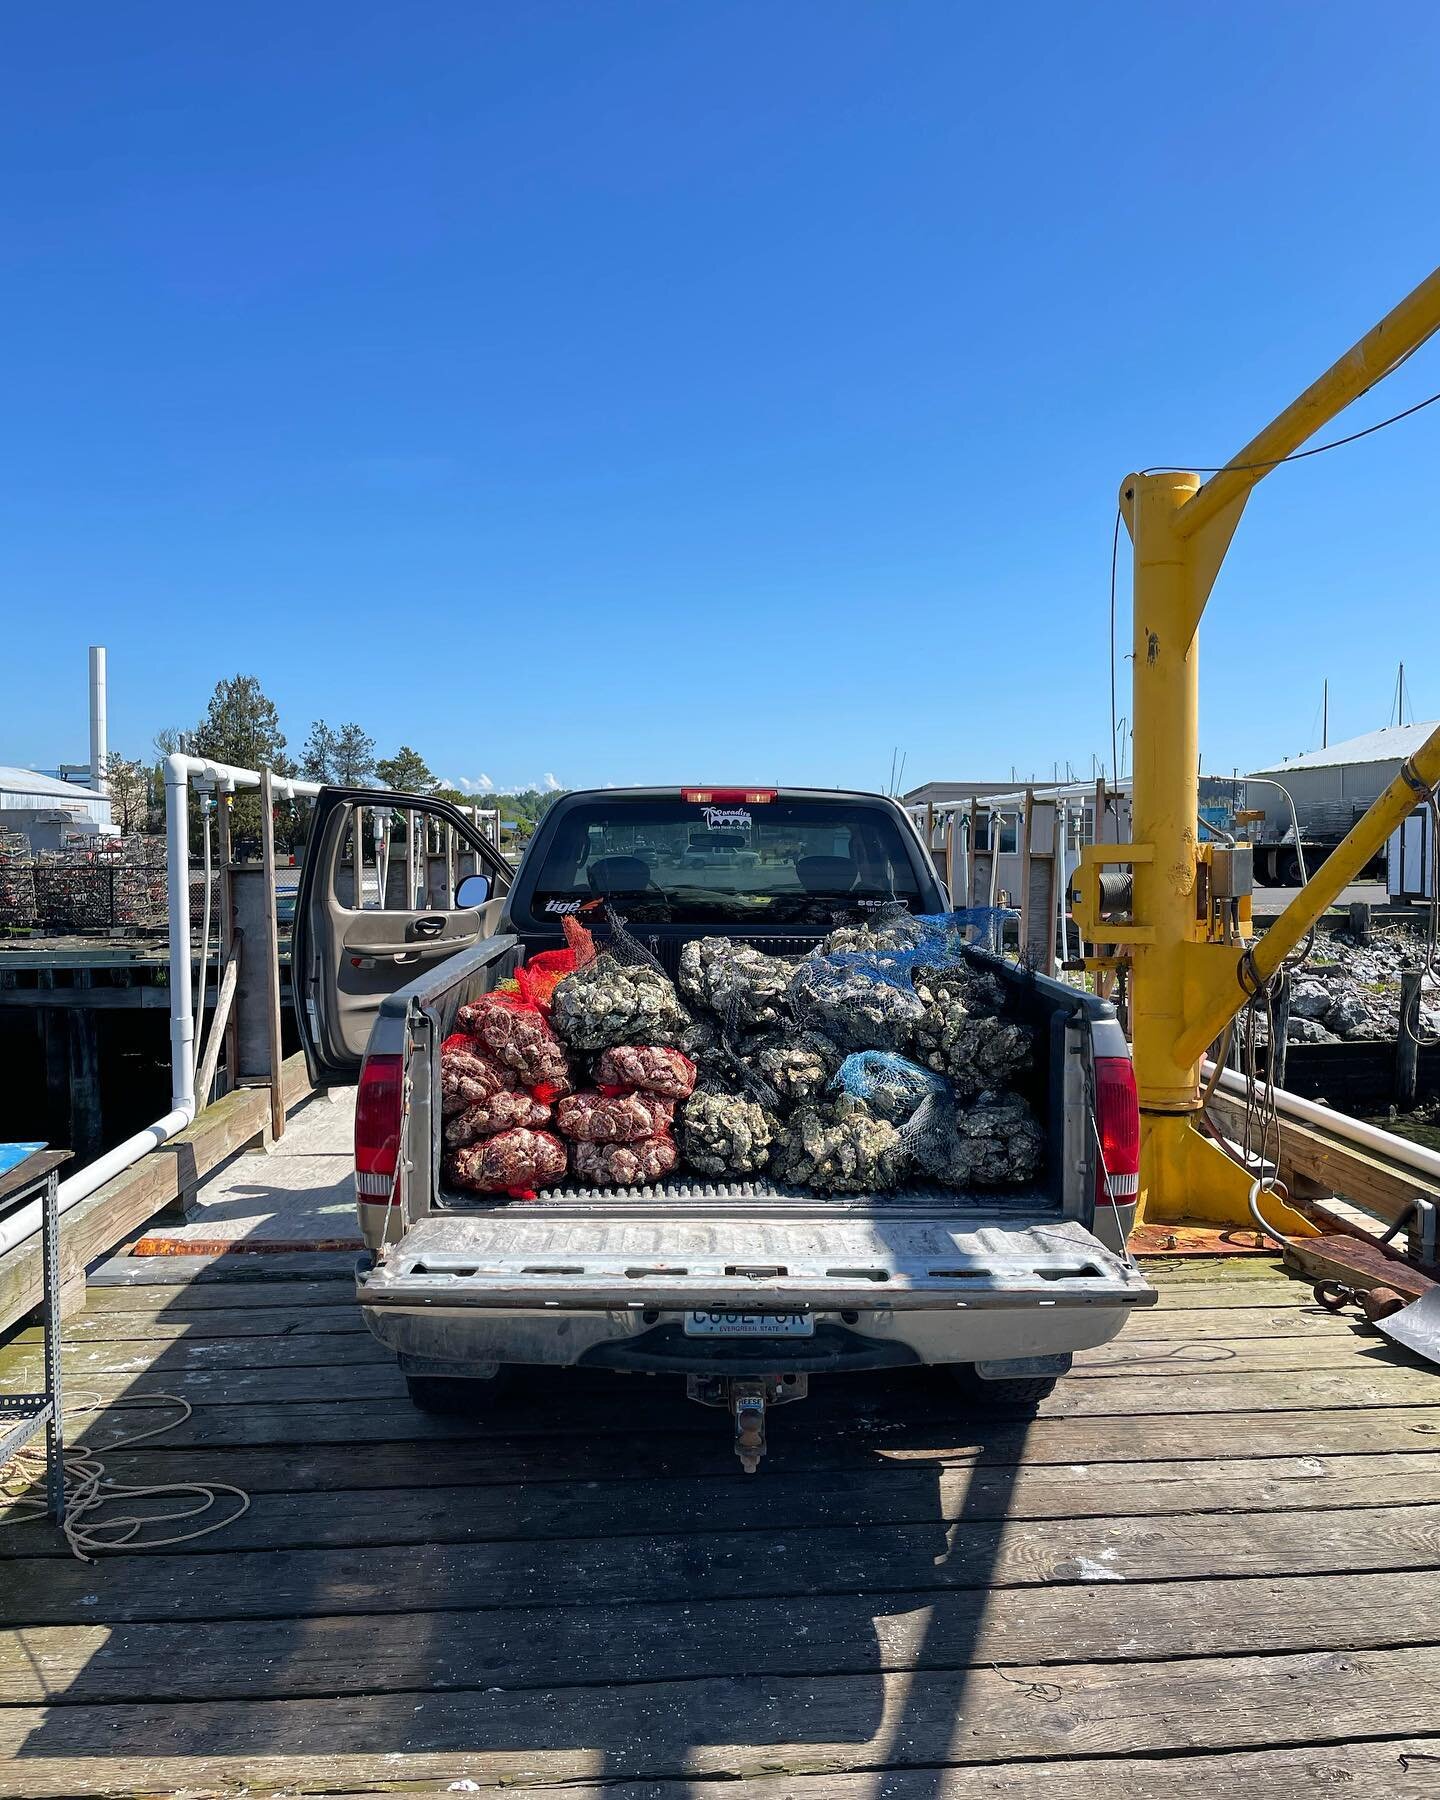 Alright, alright, alriiiiiiight! 

No fear, oysters lovers. Got another all-clear for this weeks harvest. 👏🏼 

#shuckslurprepeat #tidetotable #oysterlovers #draytonharboroystercompany